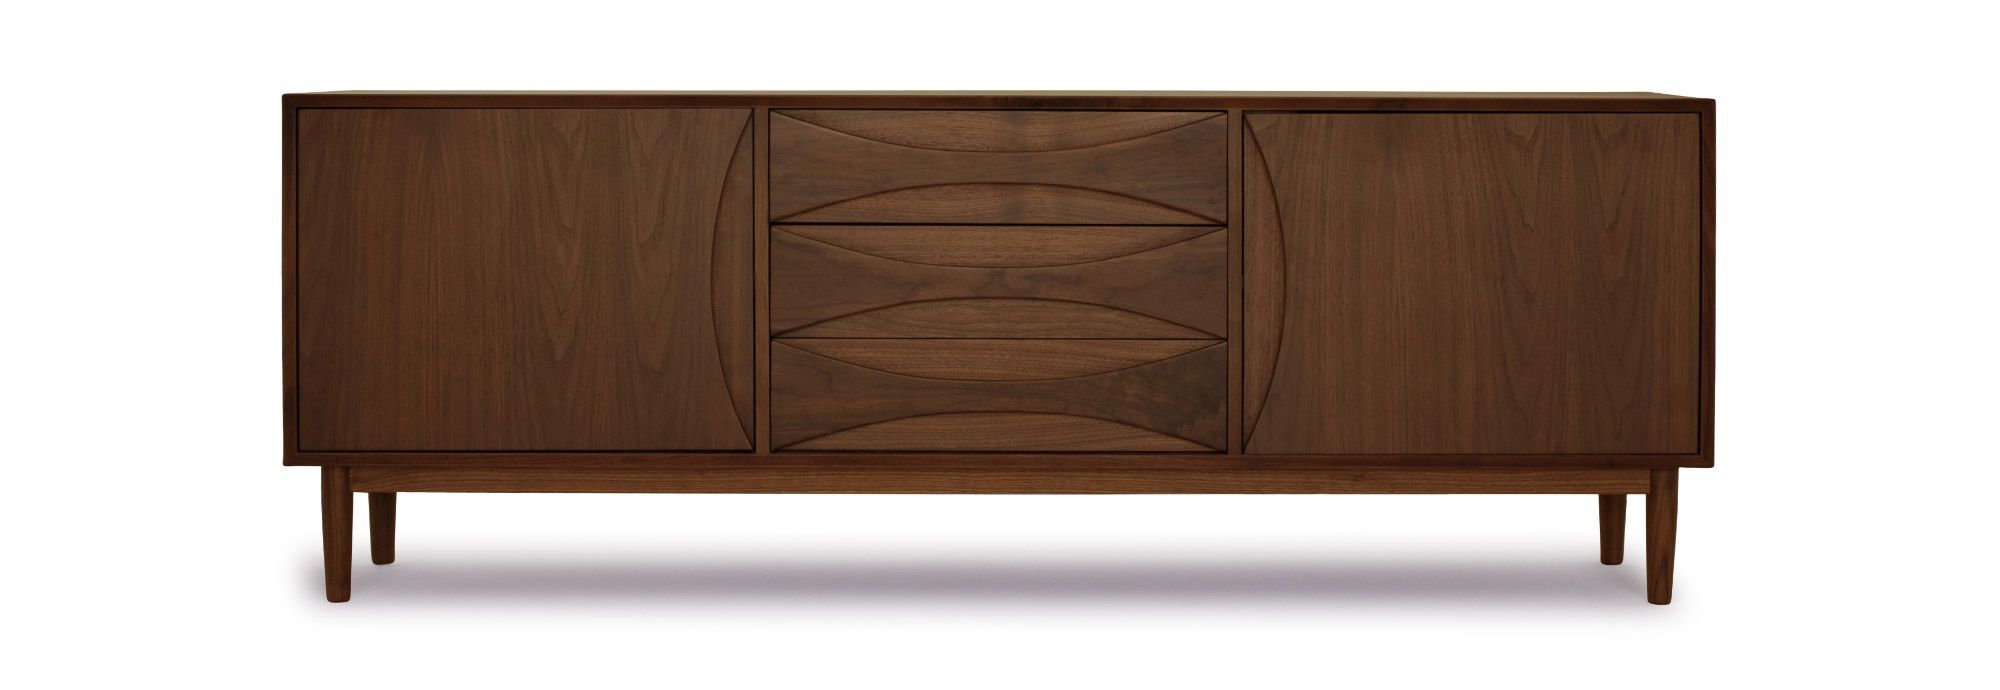 Stella Console Cabinet In 2019 | Sideboards, The Finalists With Stella Sideboards (View 12 of 20)